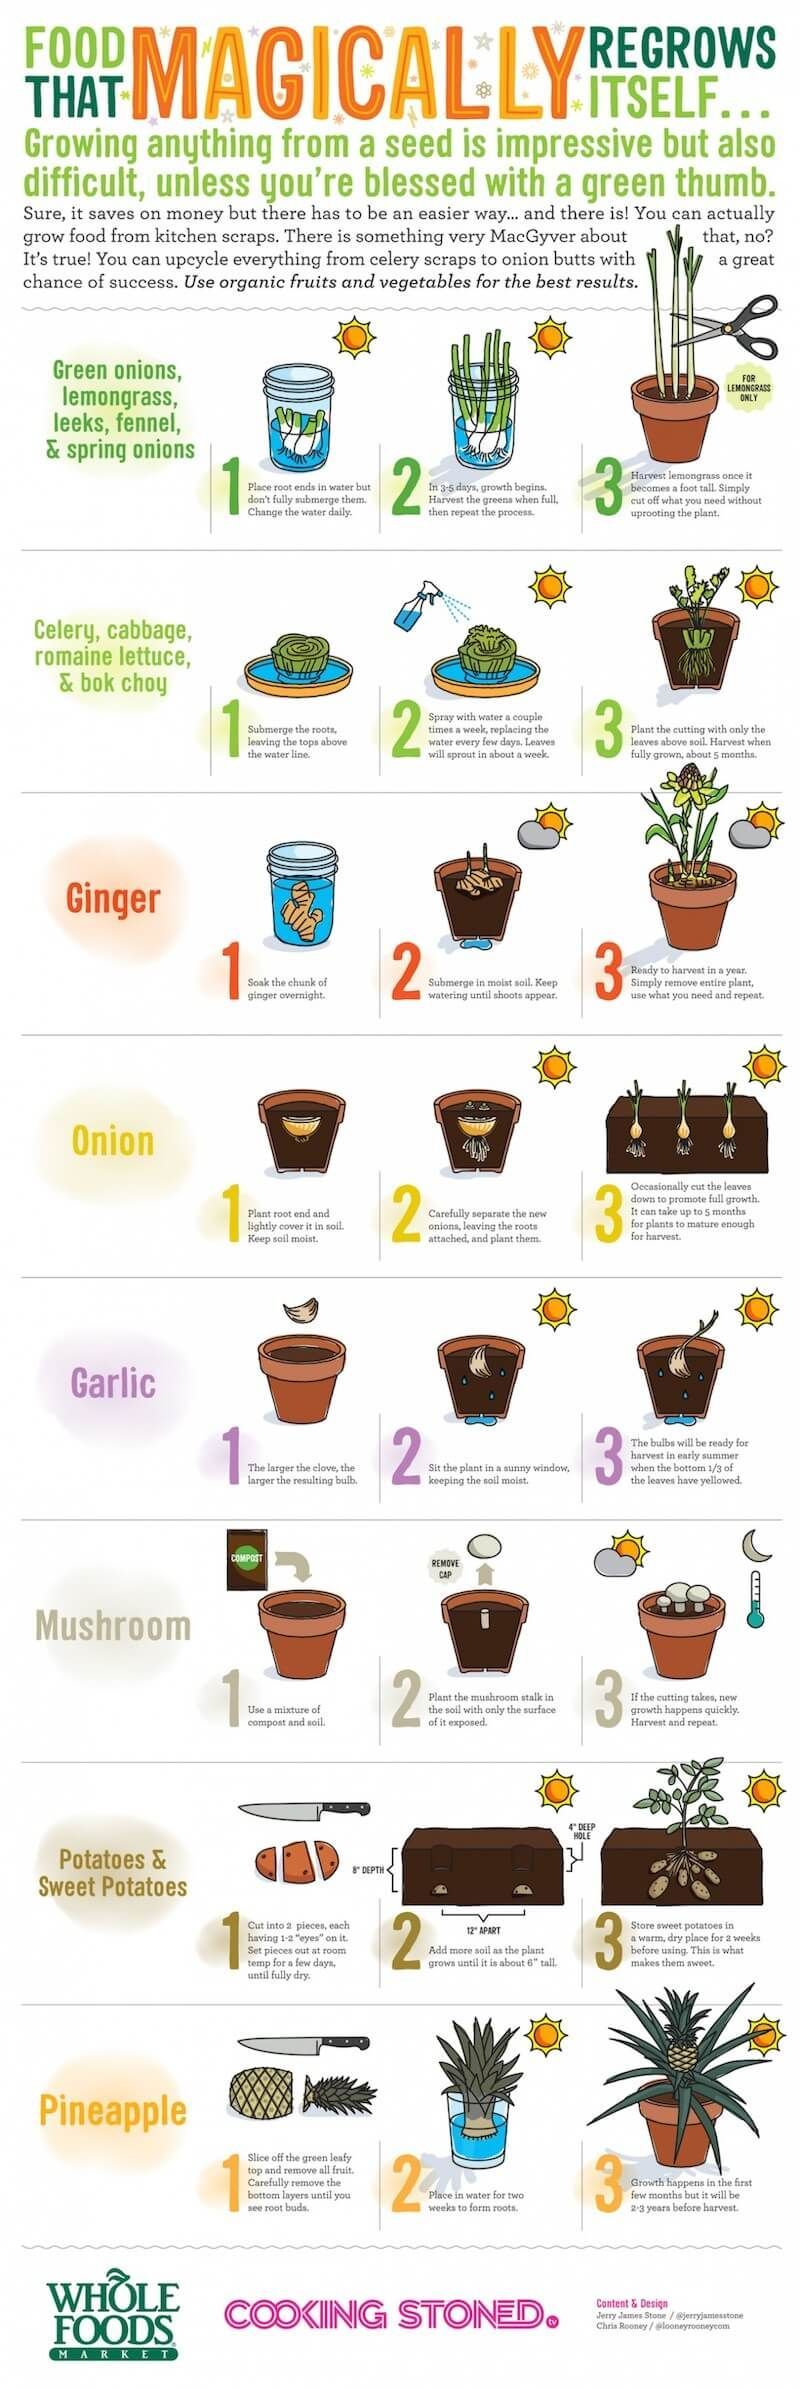 12 Vegetables That You Buy ONCE And Regrow FOREVER! Use This Guide On How To Grow Them -   17 plants Vegetables from scraps ideas